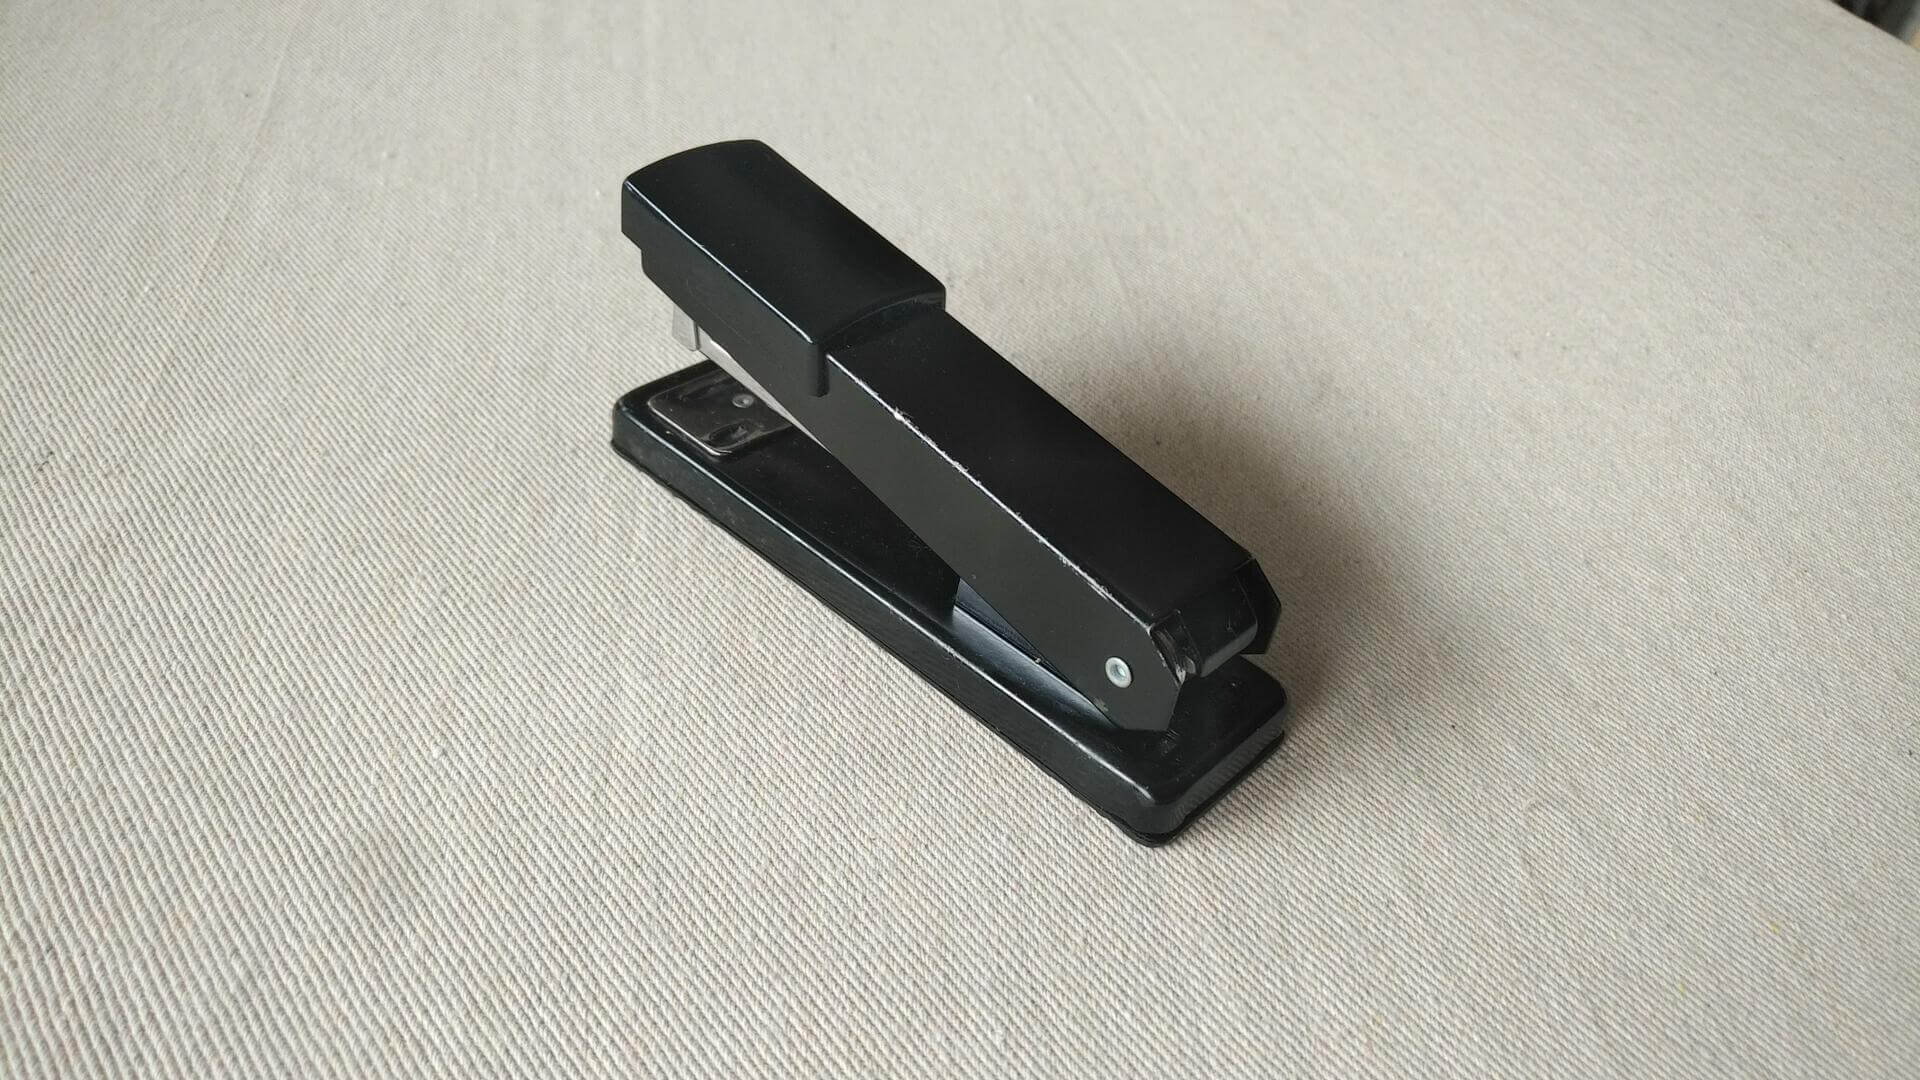 Nice vintage MCM Rexel Matador steel desk stapler in black colour. Mid century collectible made in Great Britain office equipment and stationery